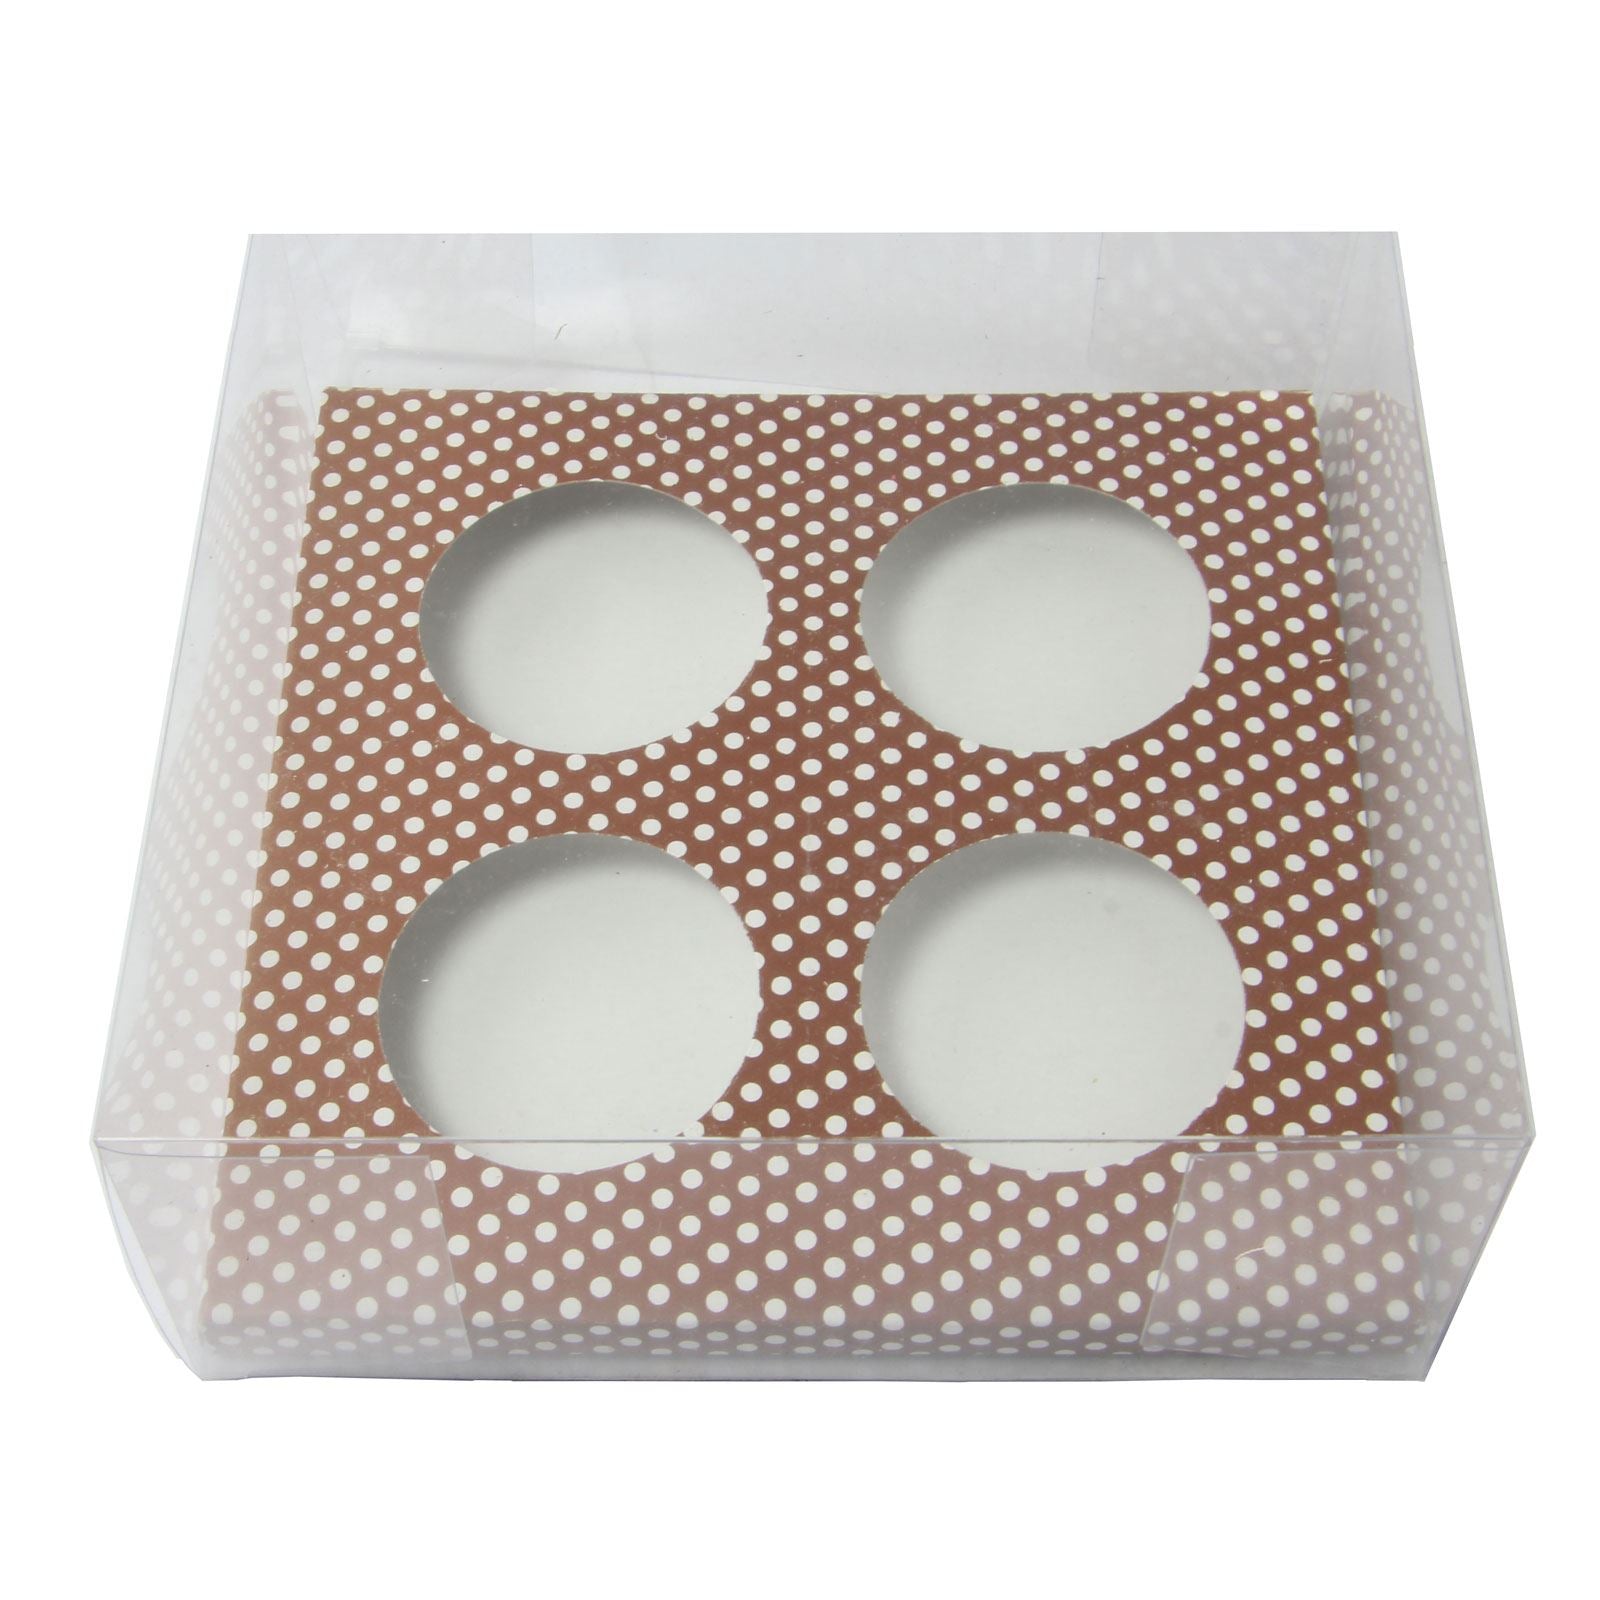 4 Hole Clear PVC Cupcake Boxes - CLEARANCE